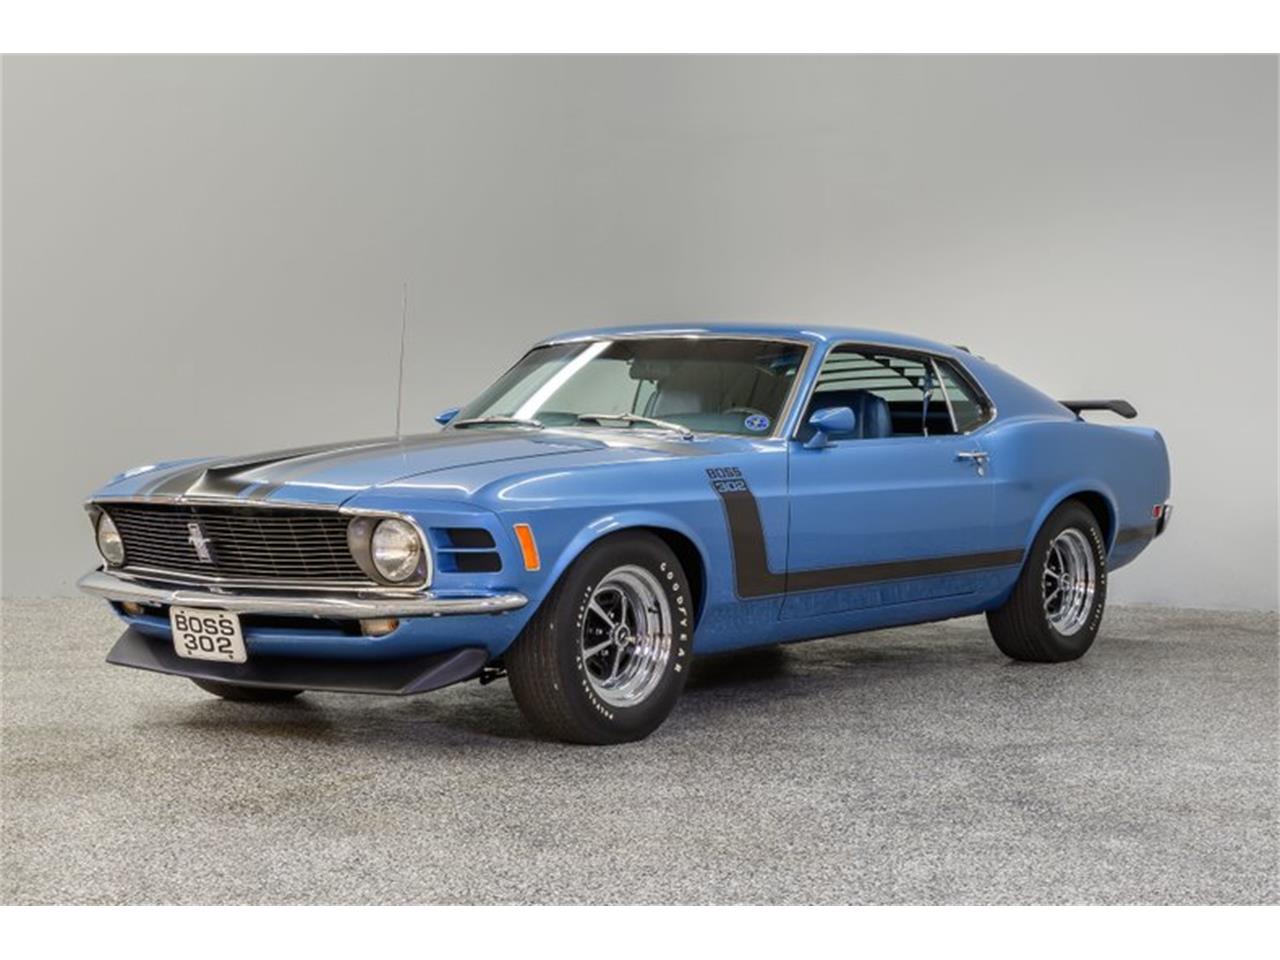 1970 Ford Mustang for sale in Concord, NC